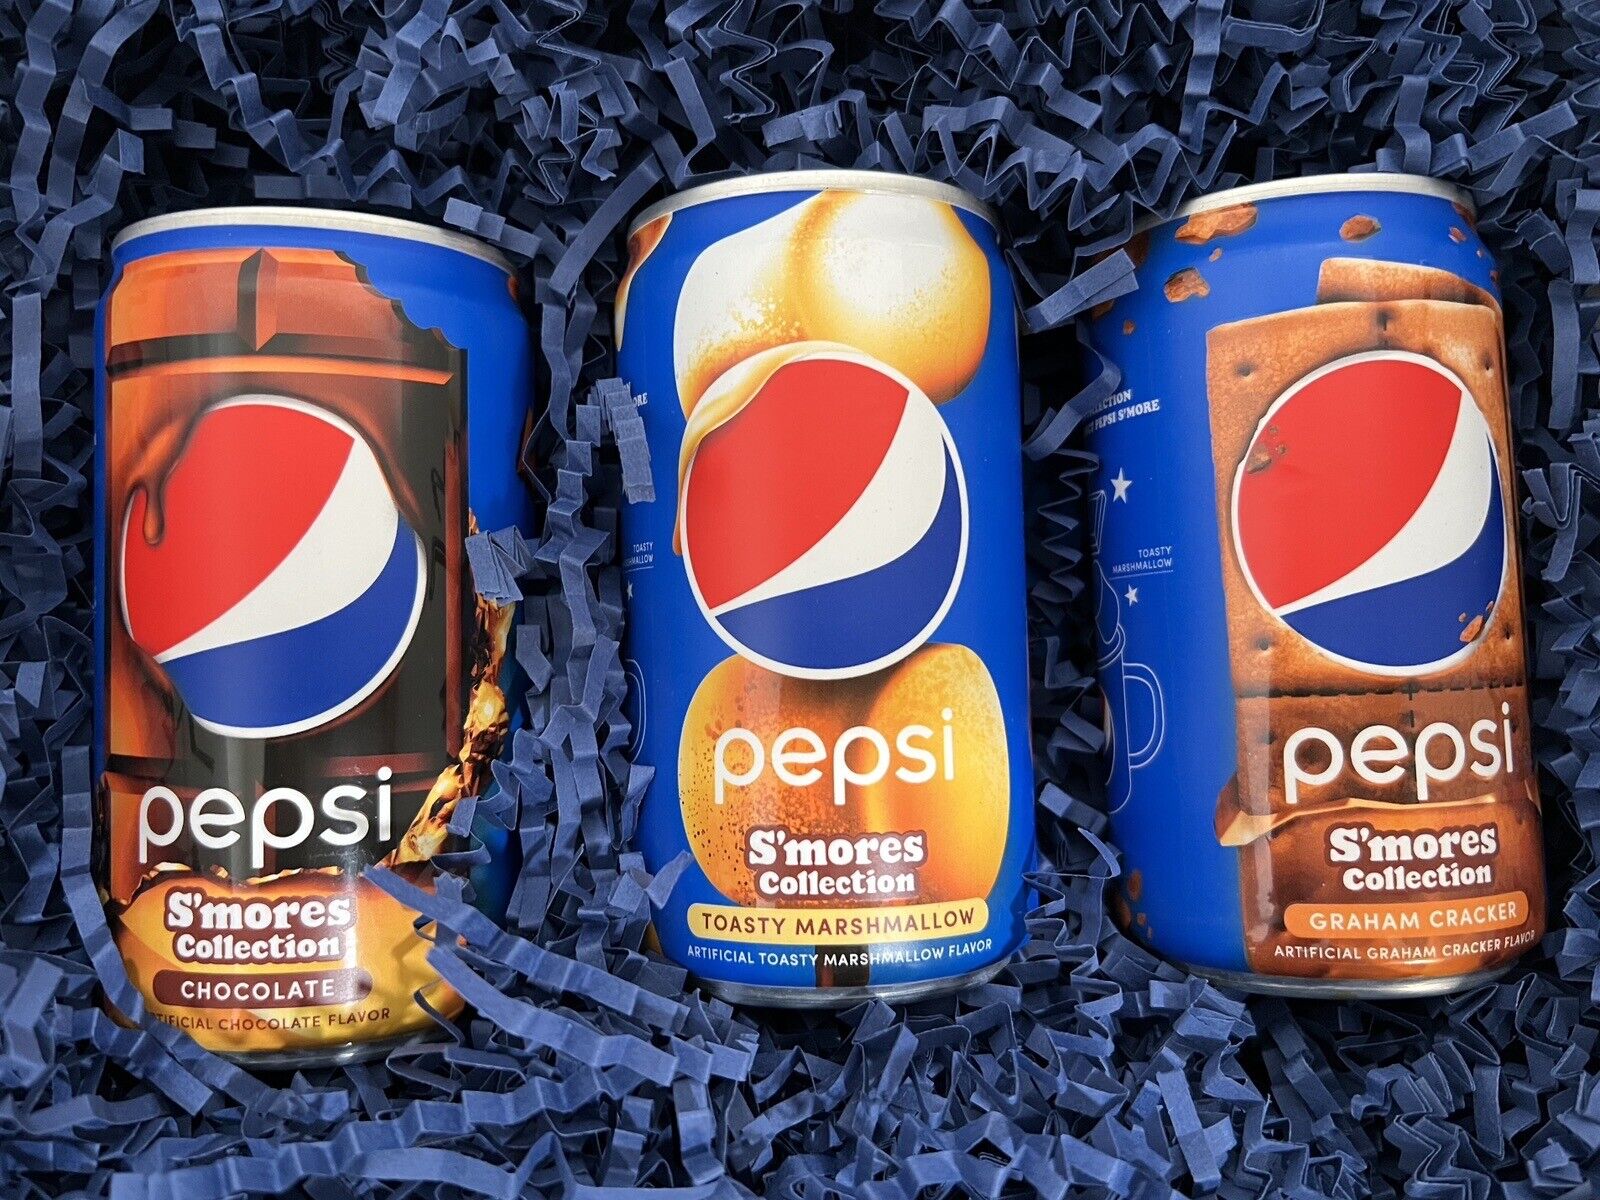 Pepsi S\'mores LIMITED EDITION 3 Cans Set Smores Collection Sweepstakes